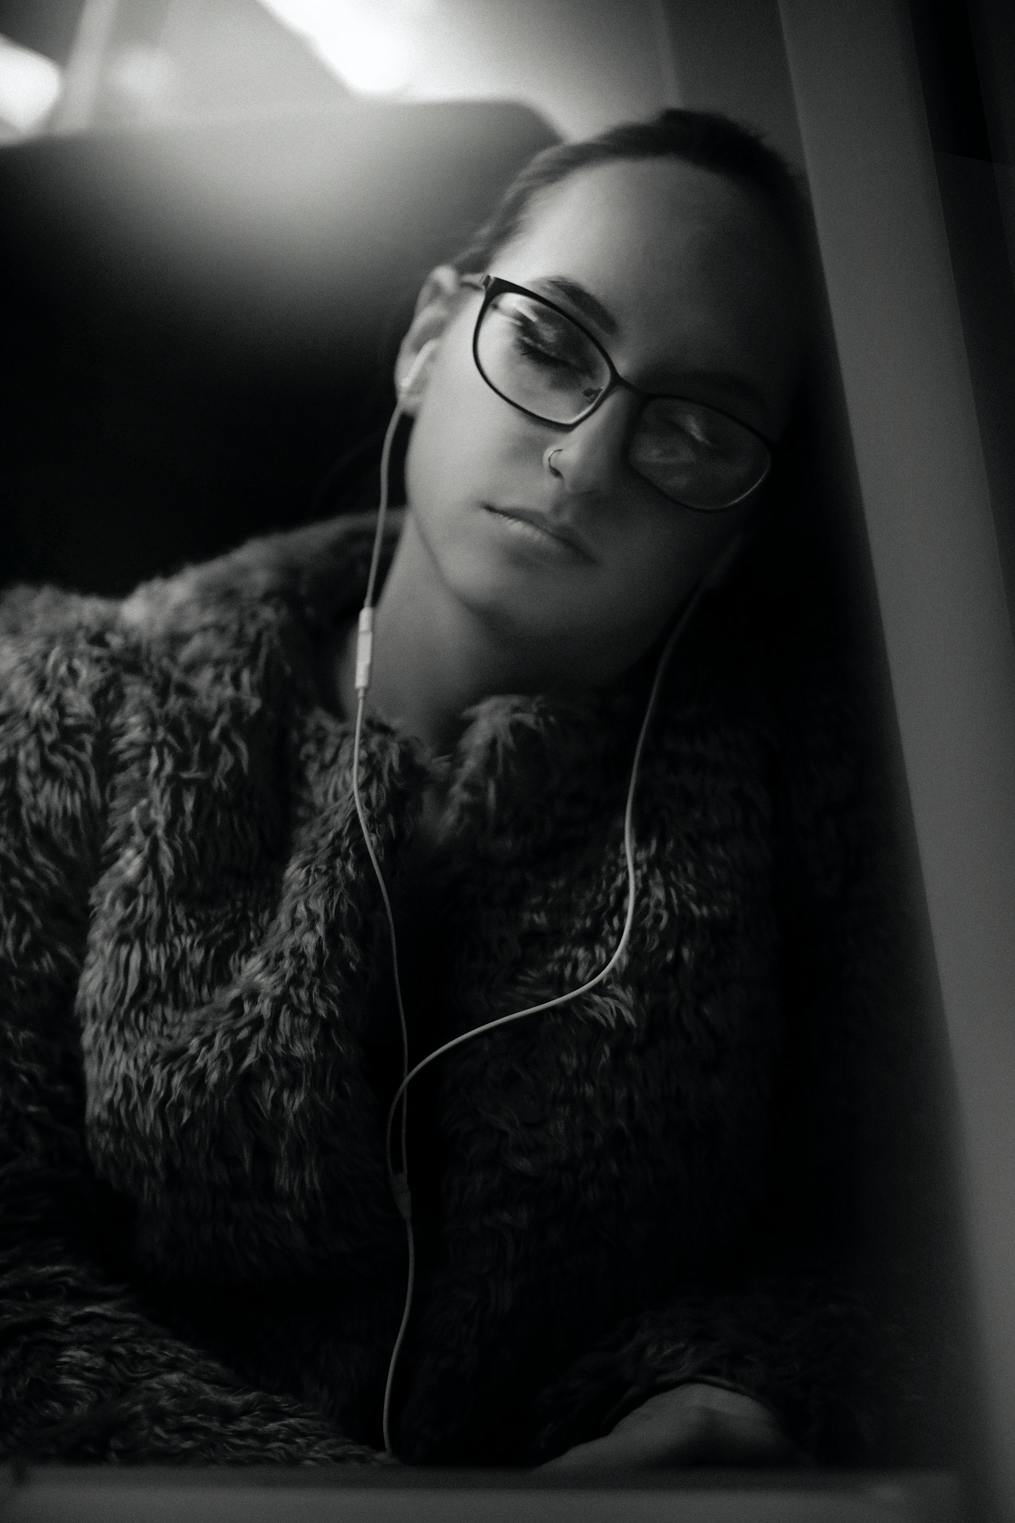 Audiobooks-and-dictation-woman-sleeping-with-headphones-on-a-train-new-blog-post-how-to-balance-teaching-and-writing-susan-shiney